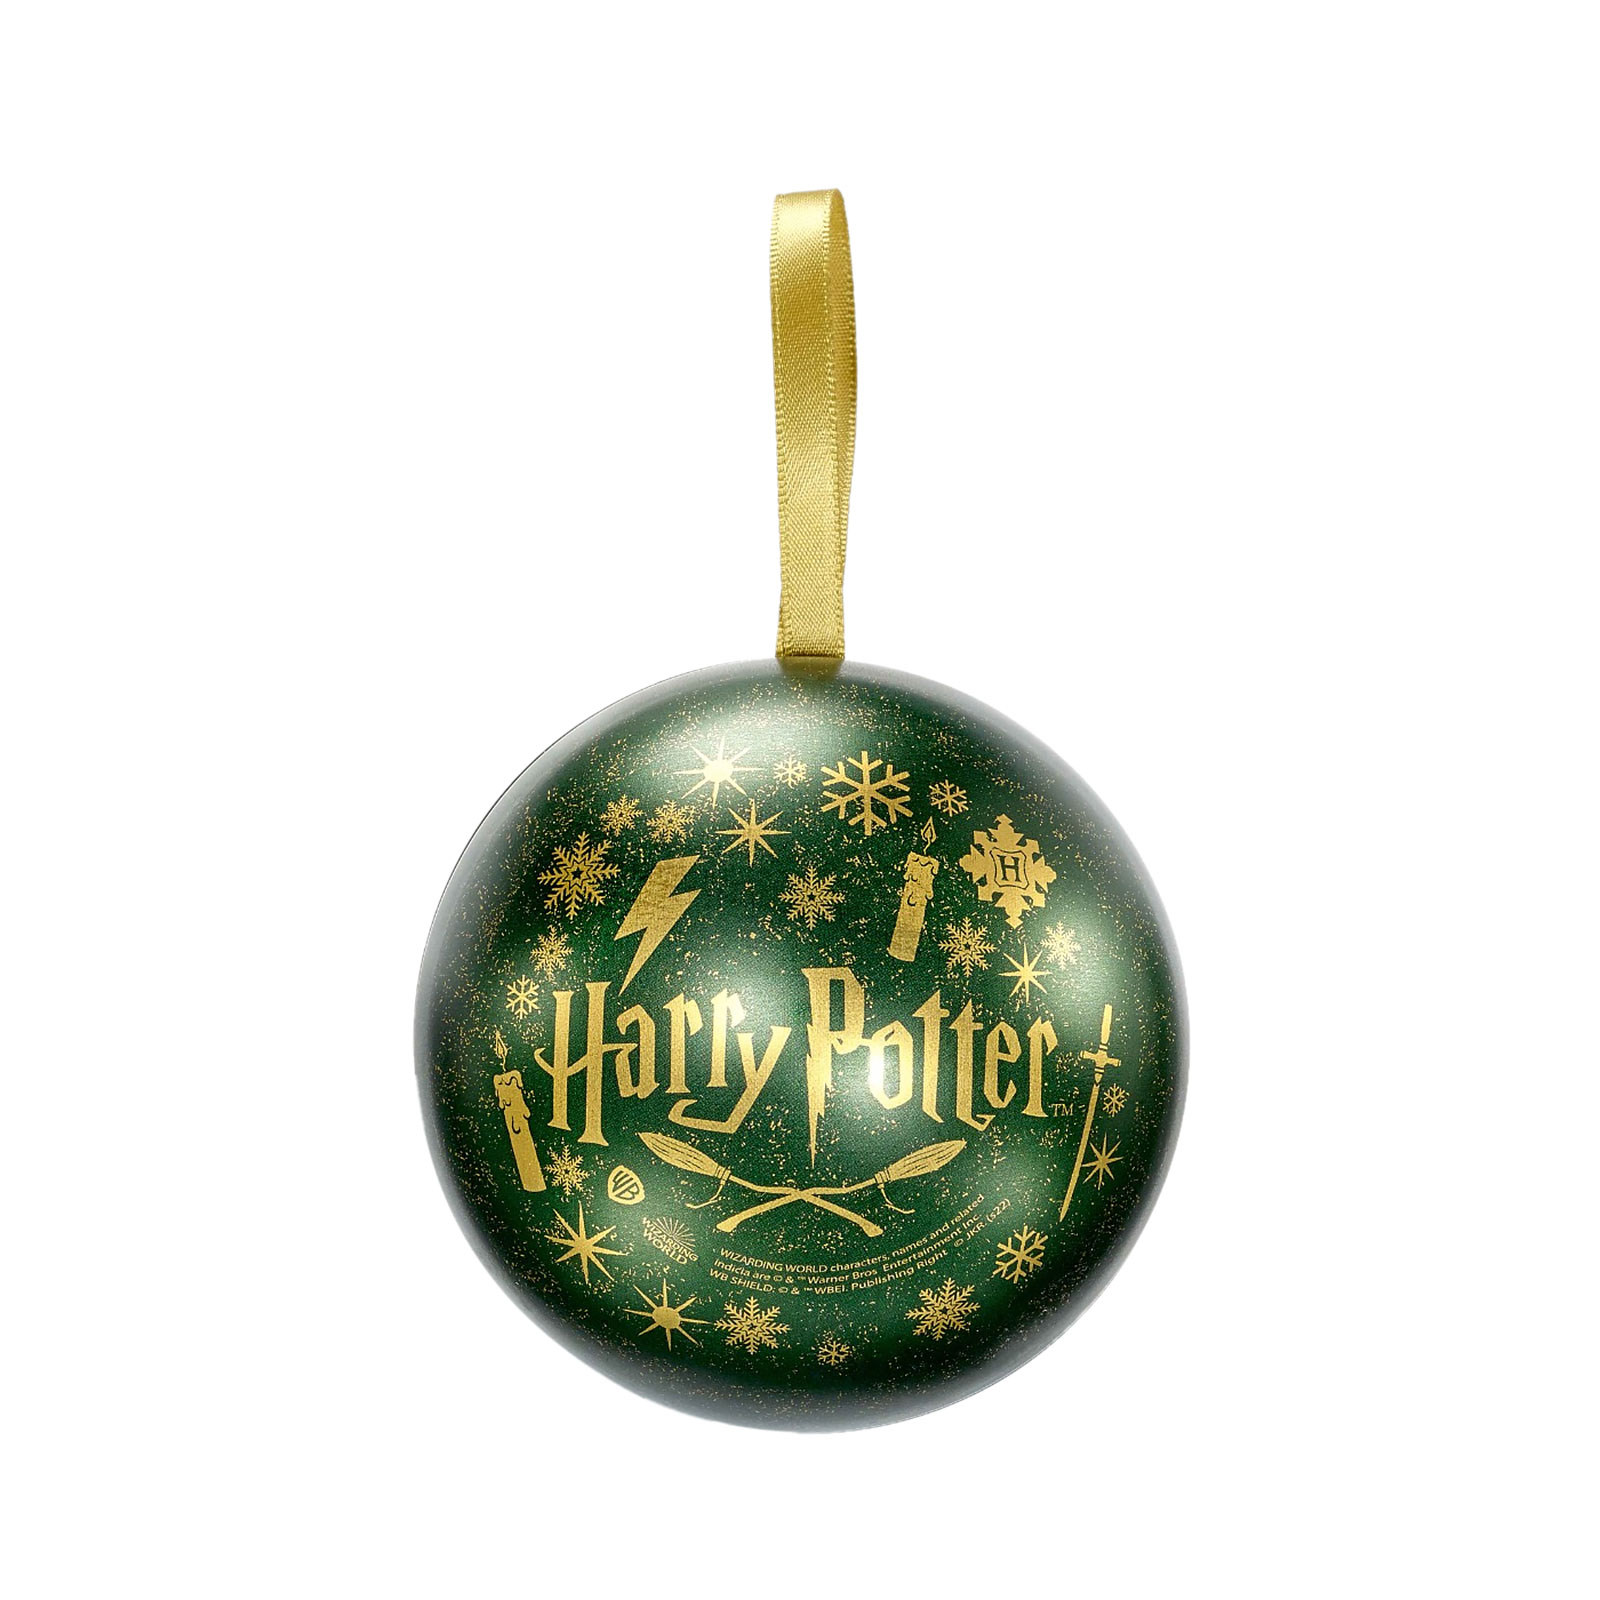 Harry Potter - Christmas Ornament with Slytherin Crest Necklace